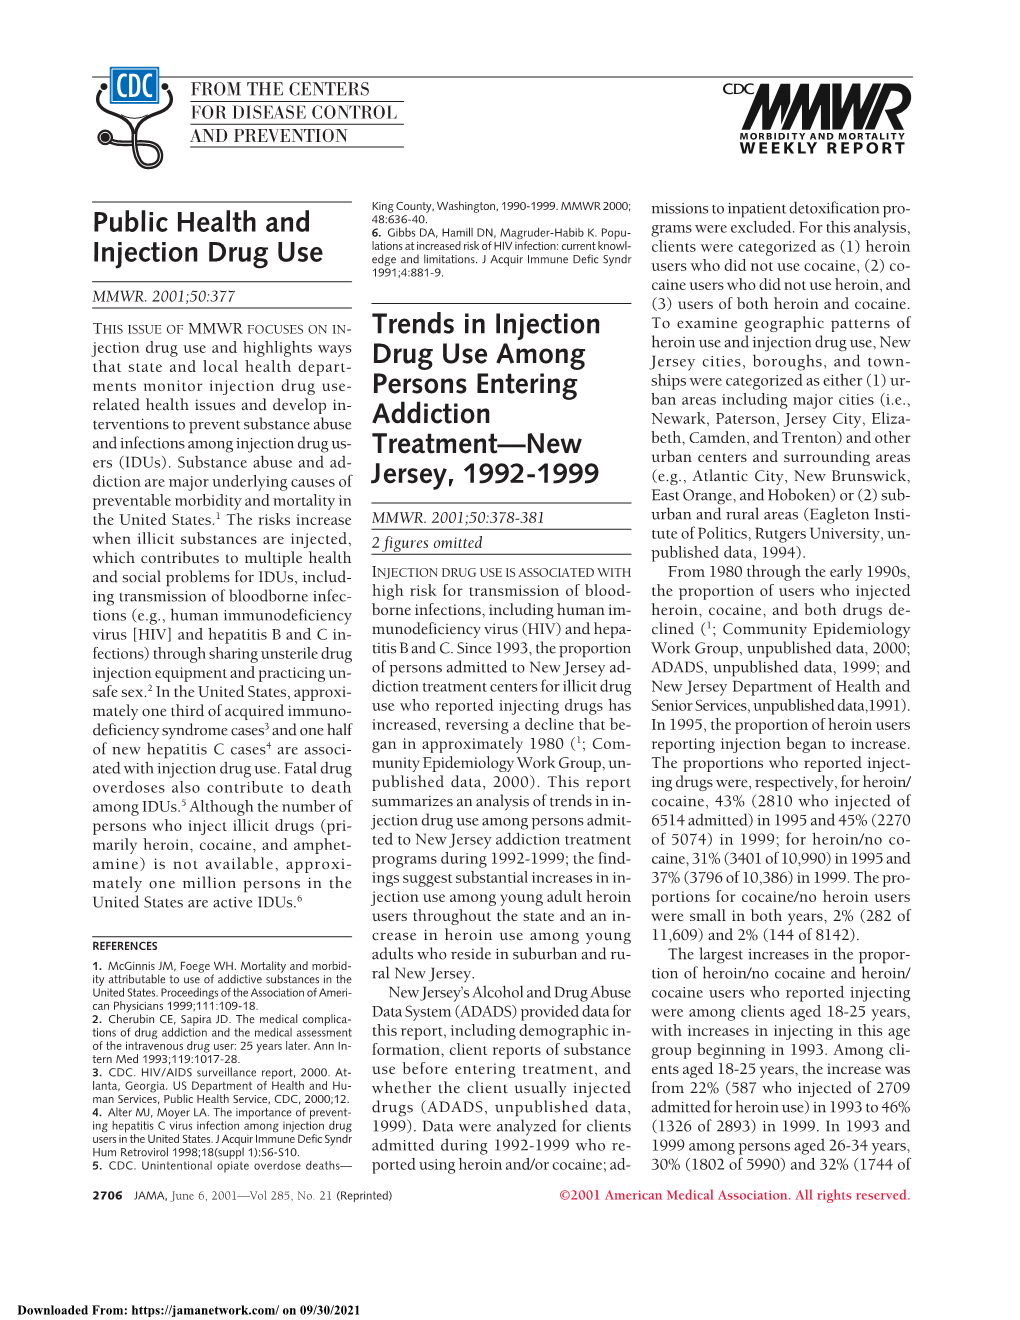 Public Health and Injection Drug